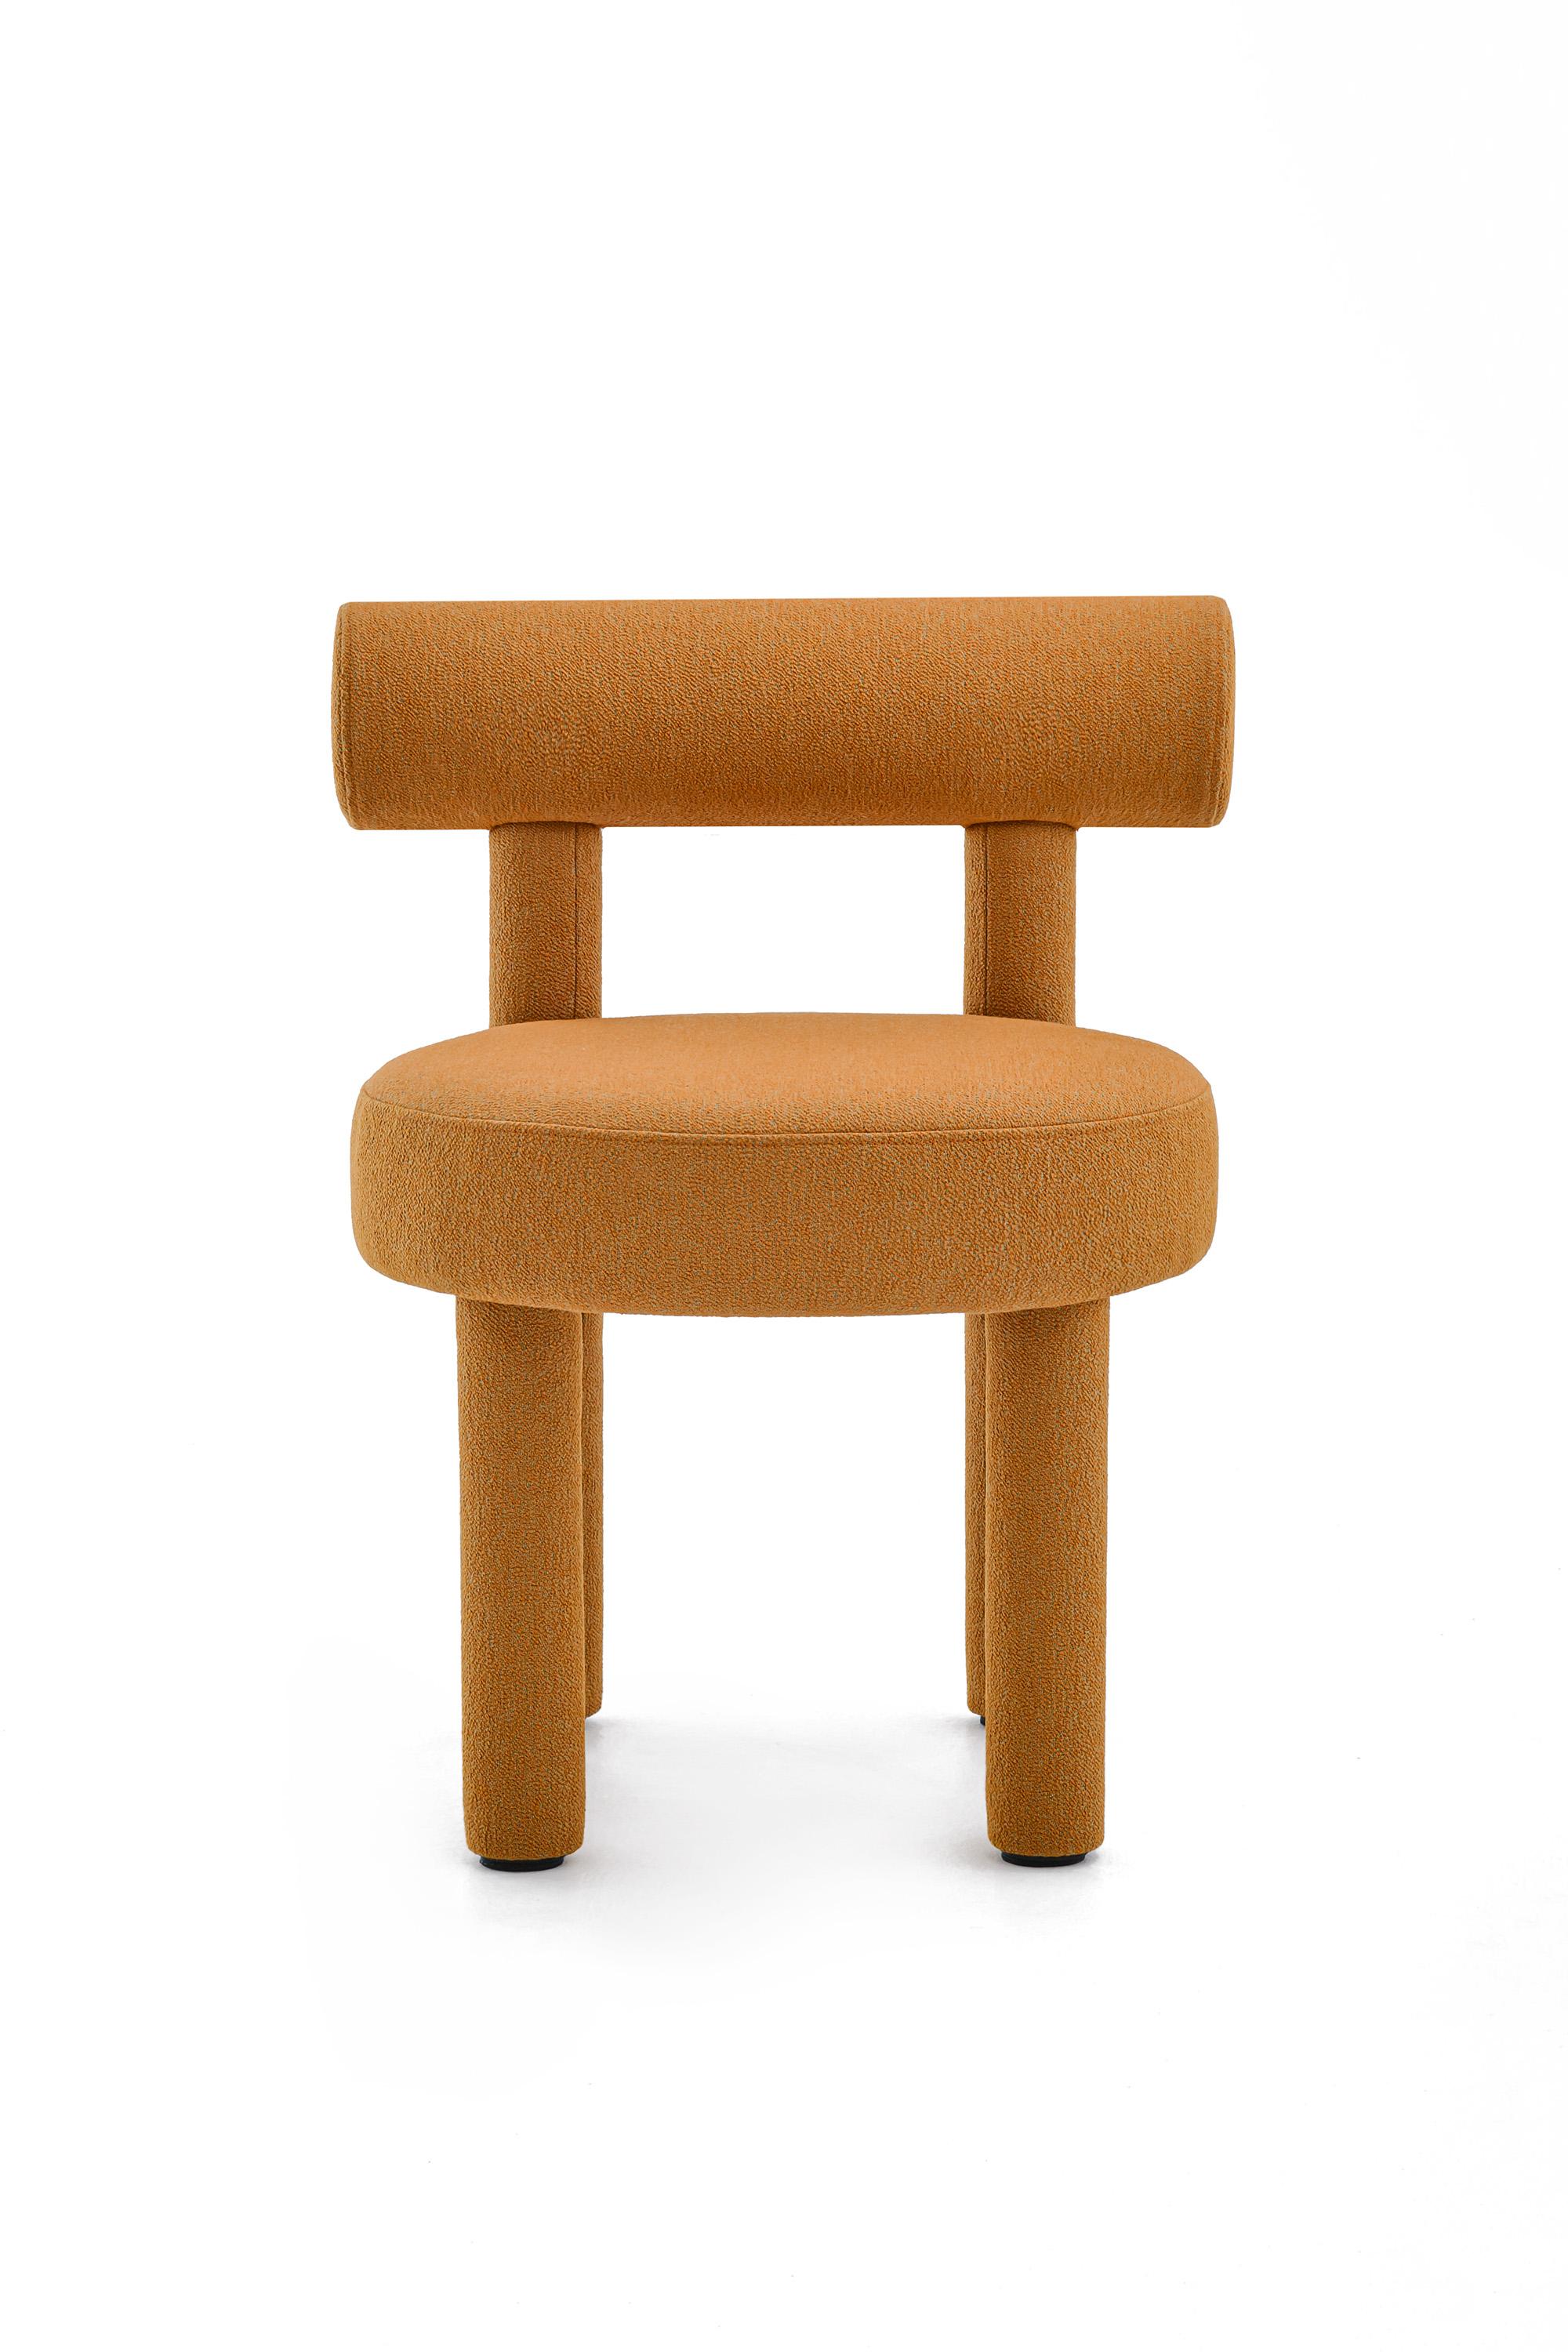 Modern Dining Chair Gropius CS1 in Rohi Sera Contract Wool Fabric by Noom 2